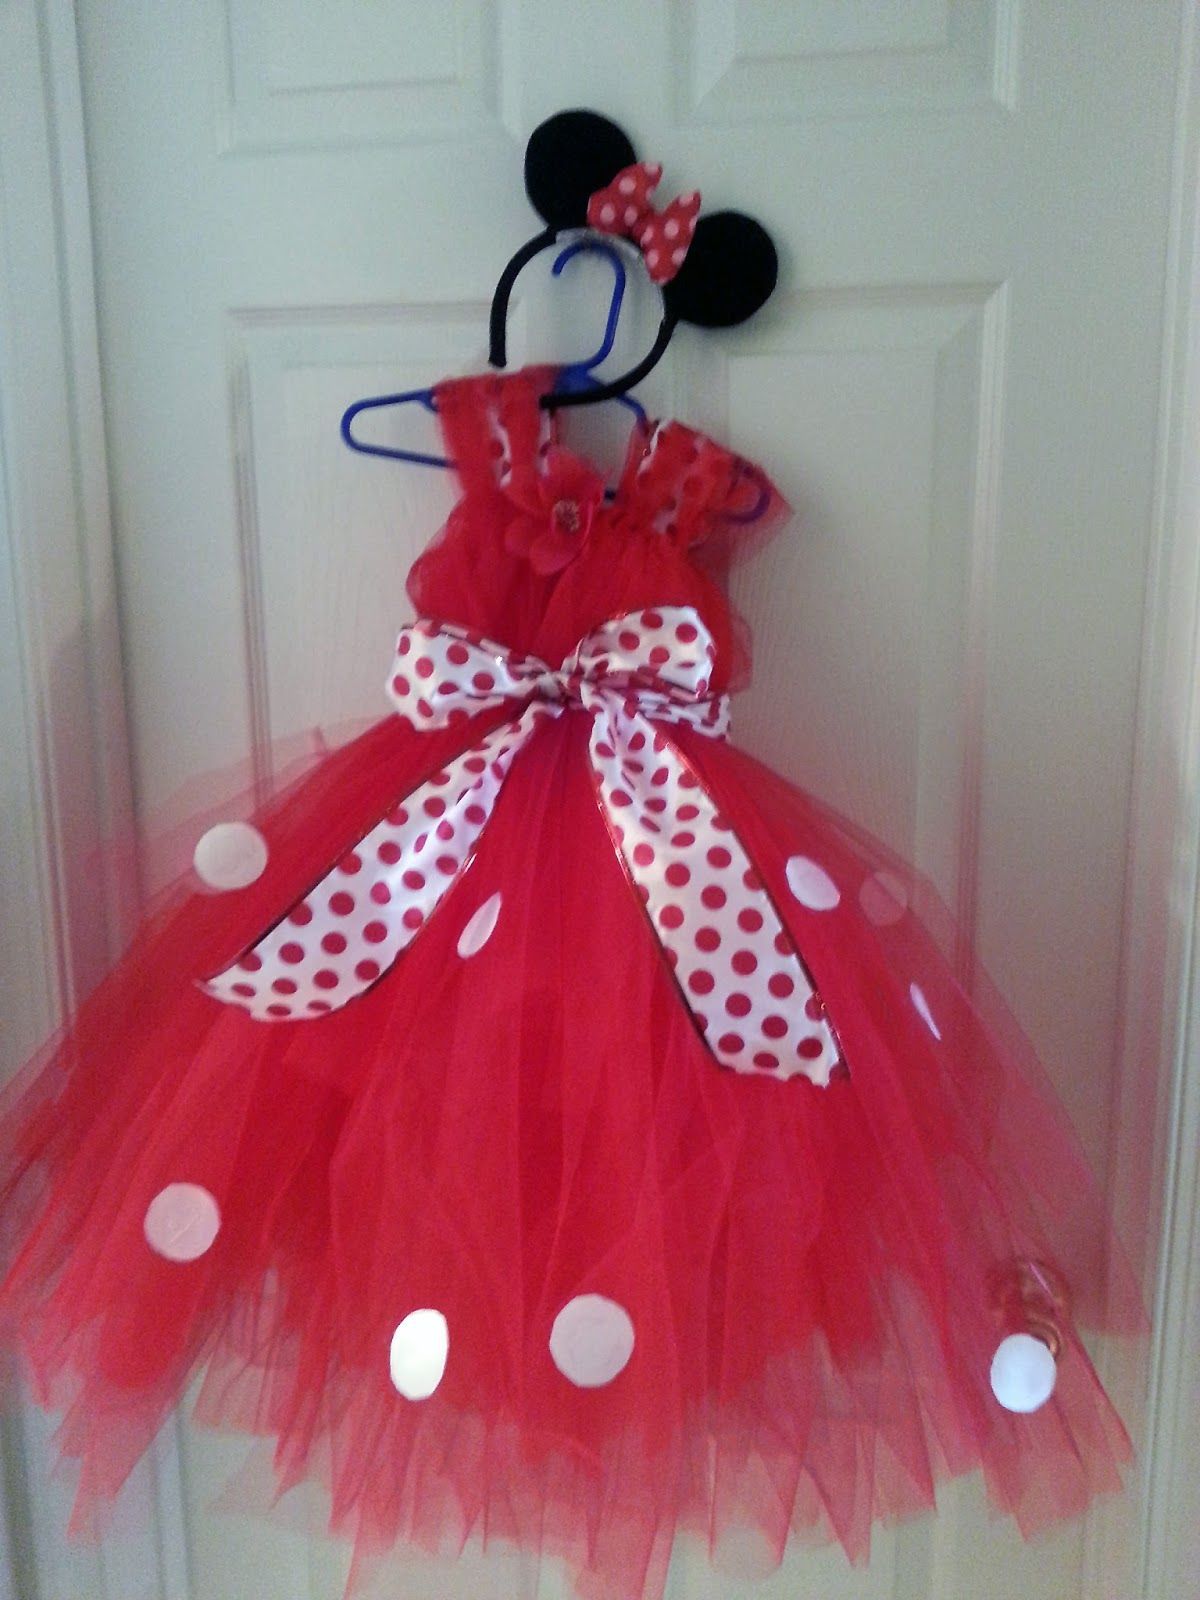 DIY Minnie Mouse tutu dress (for my little girl!!!)